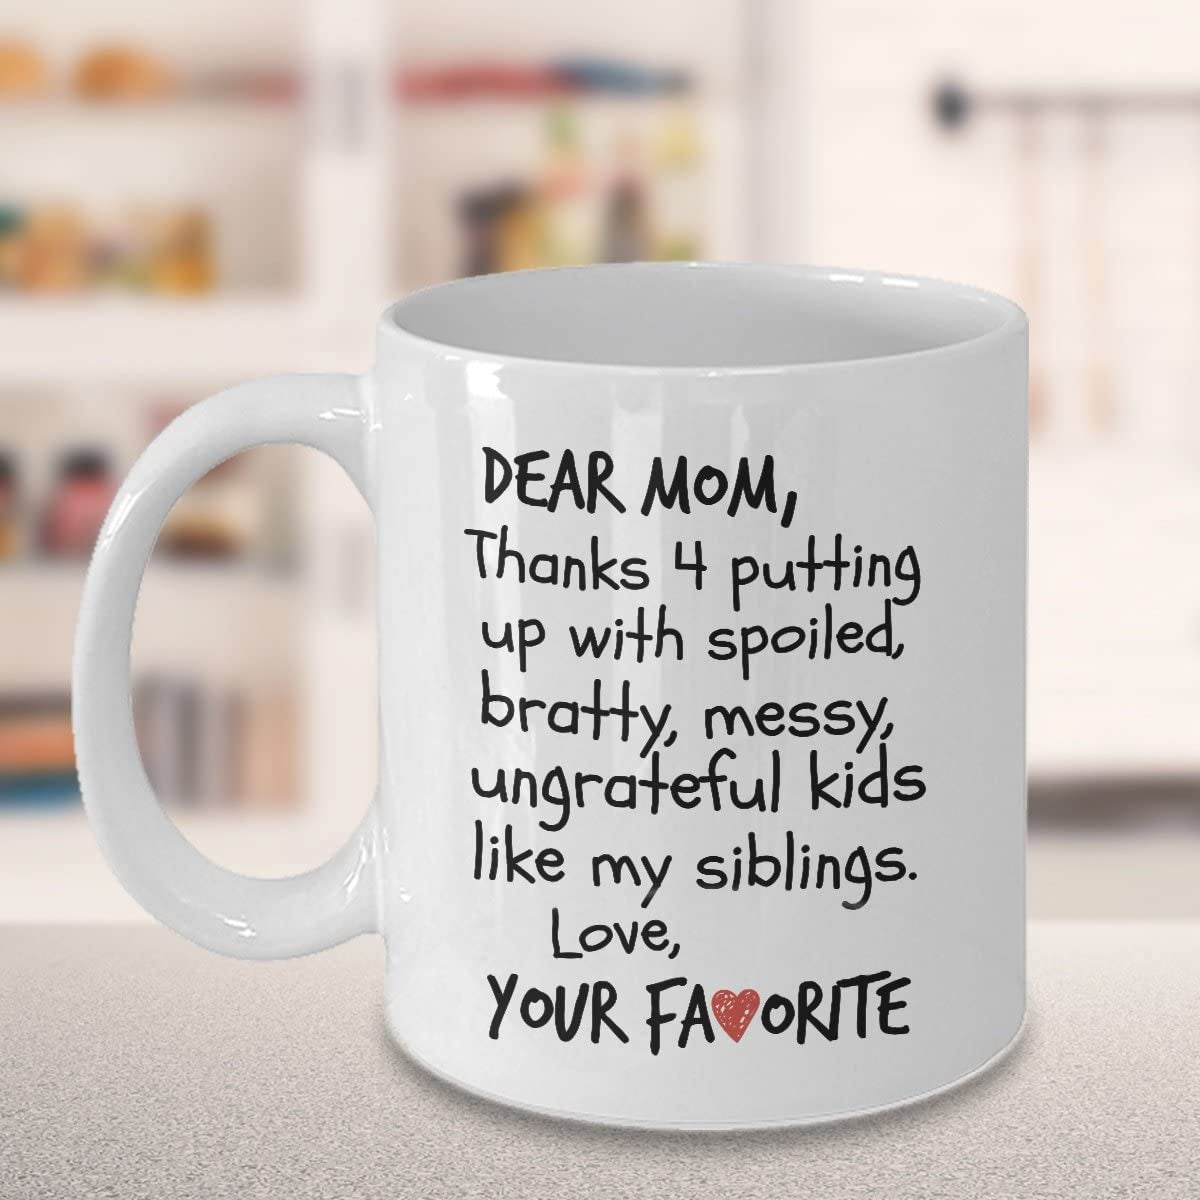 Dear Mom Thanks 4 Putting Up With Spoiled, Bratty, Ungrateful Kids Like My Siblings